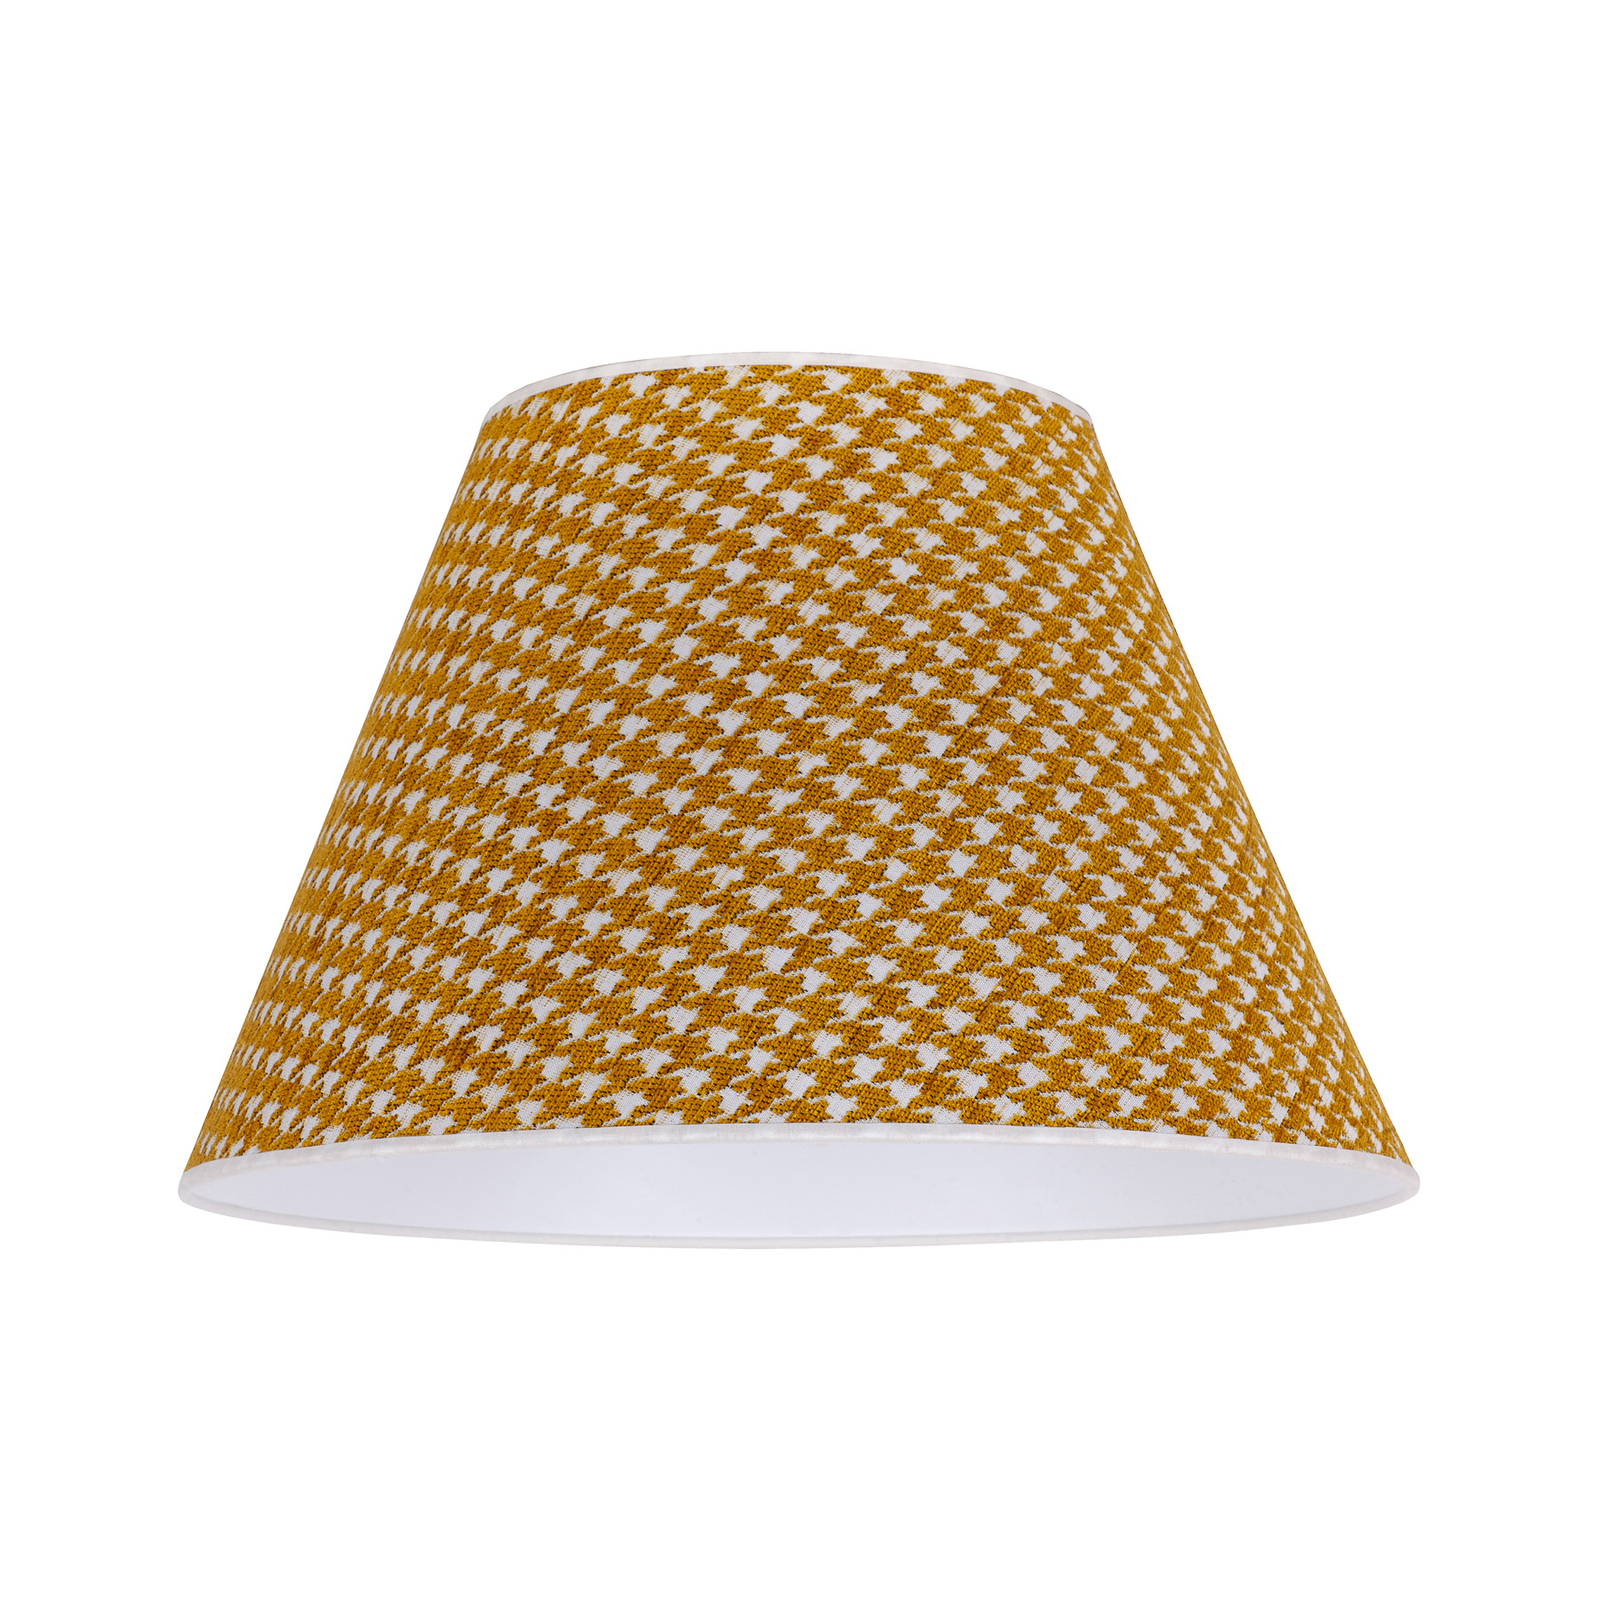 Sofia lampshade 31 cm, houndstooth pattern yellow